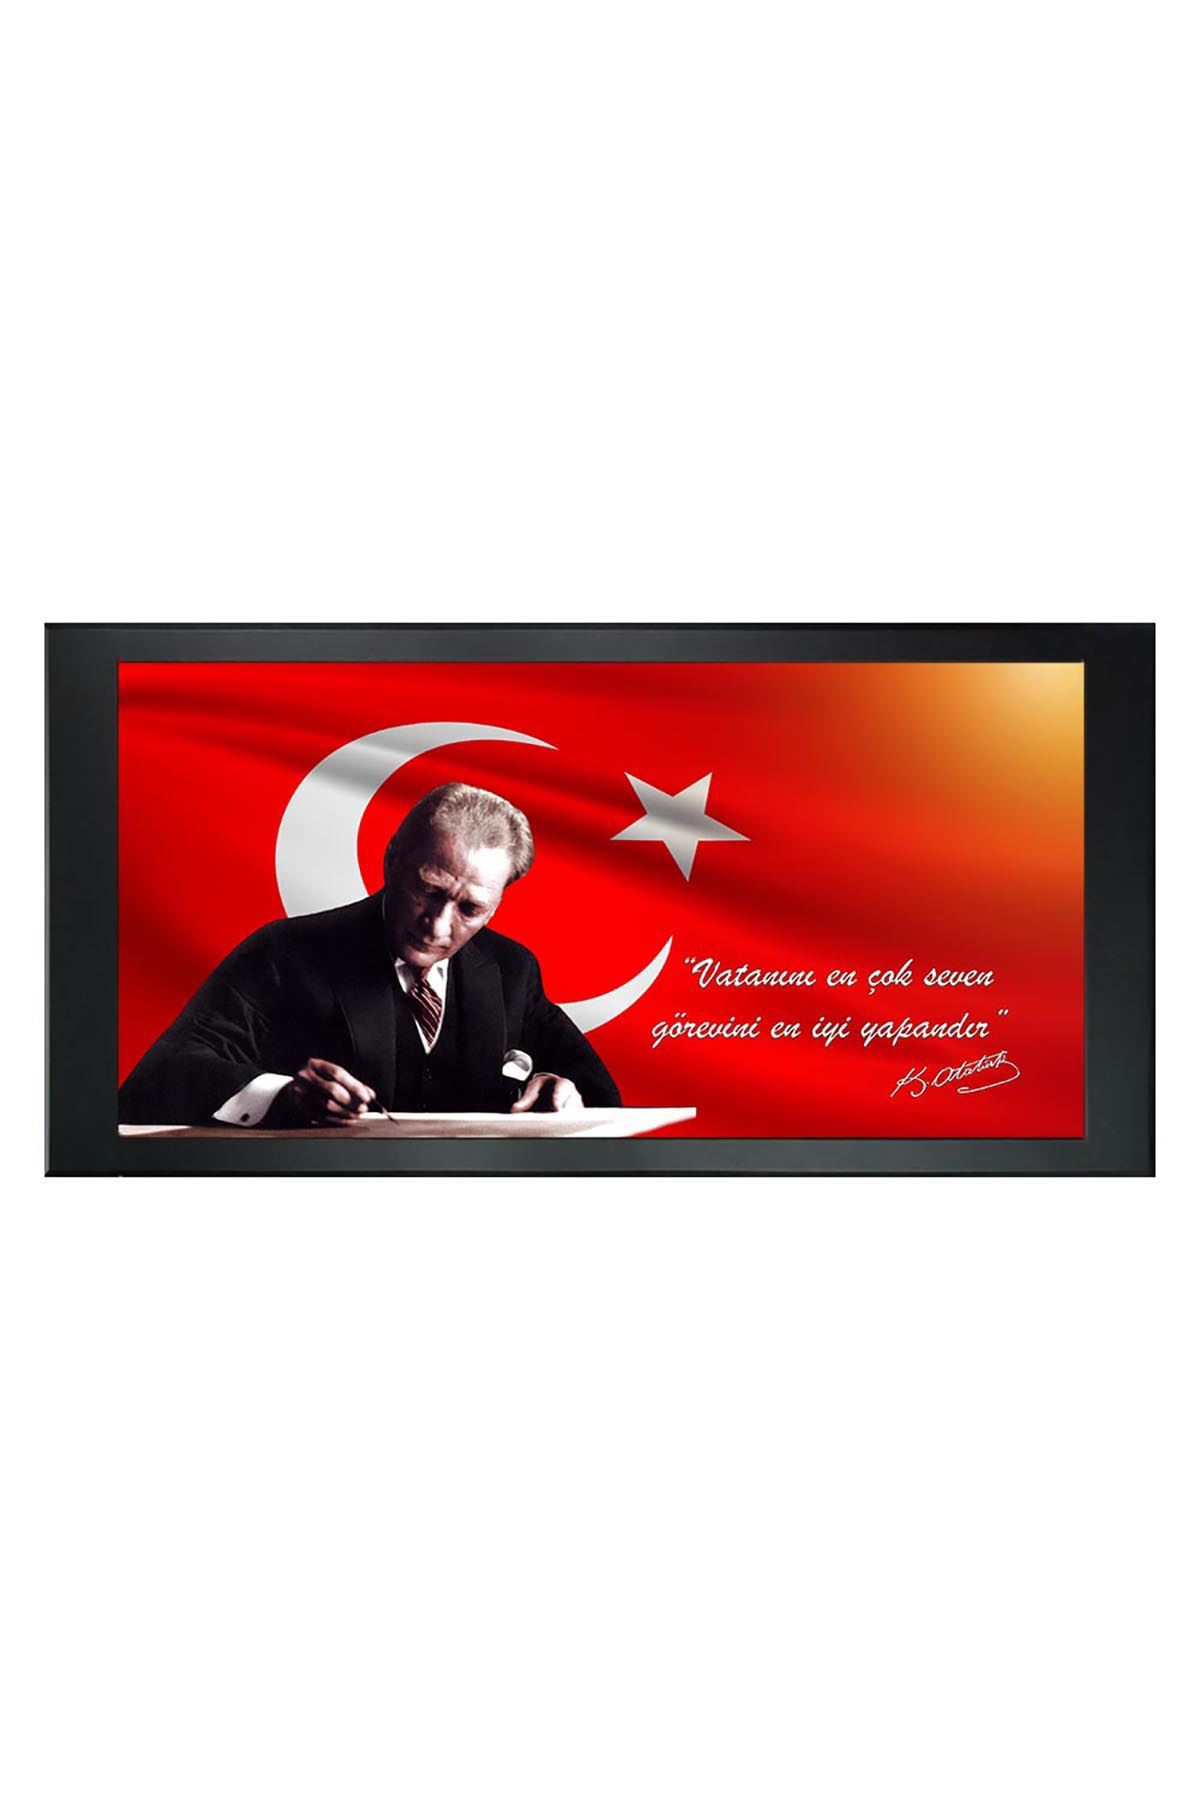 Atatürk Printed Manager Board | Printed Manager Board | Leather Framed Board | High Quality Manager Board